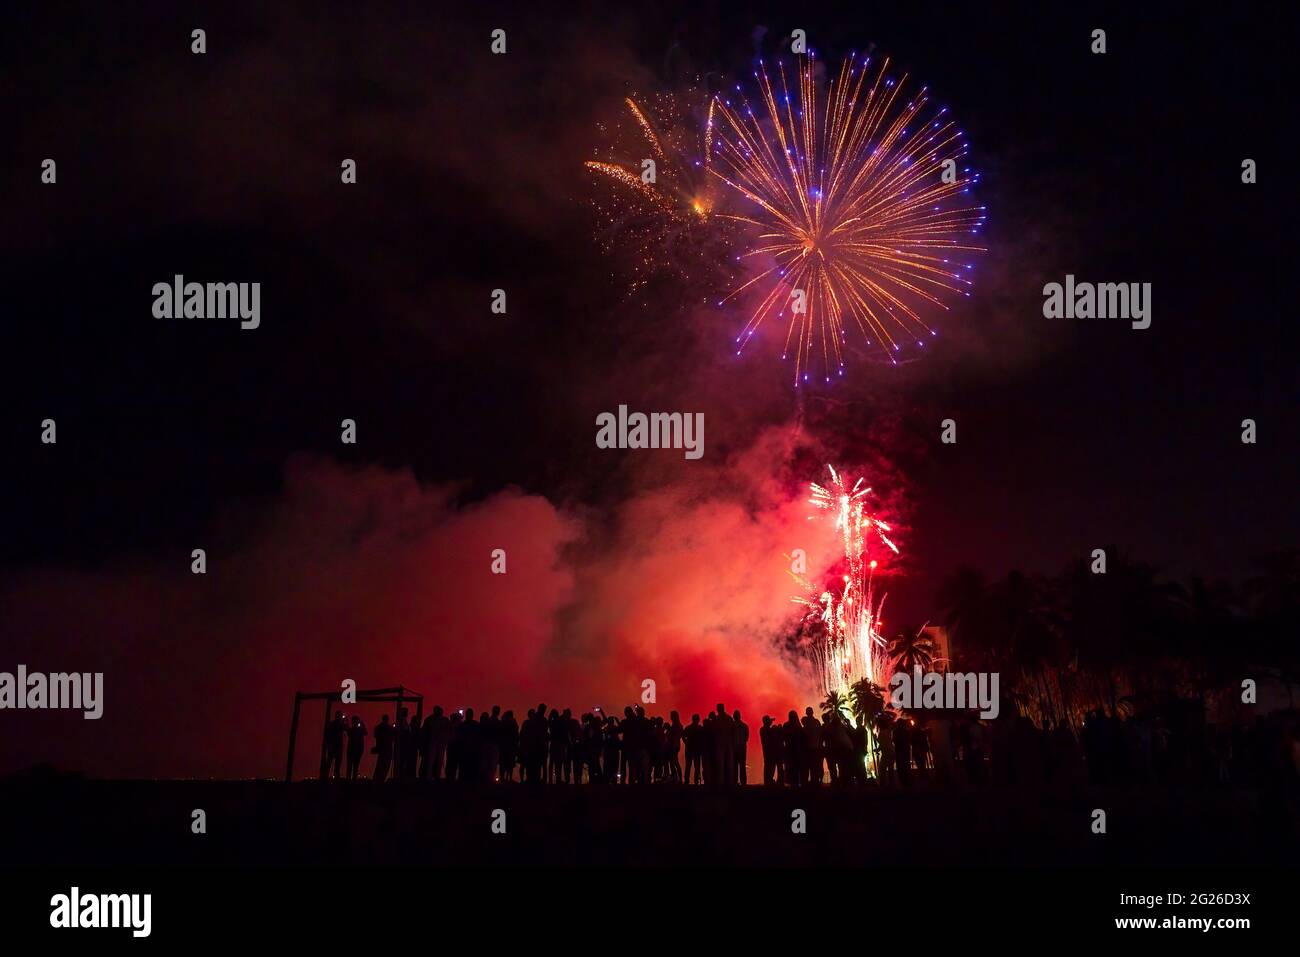 A Crowd Of People Are Watching A Colorful Fireworks Celebration Display Stock Photo